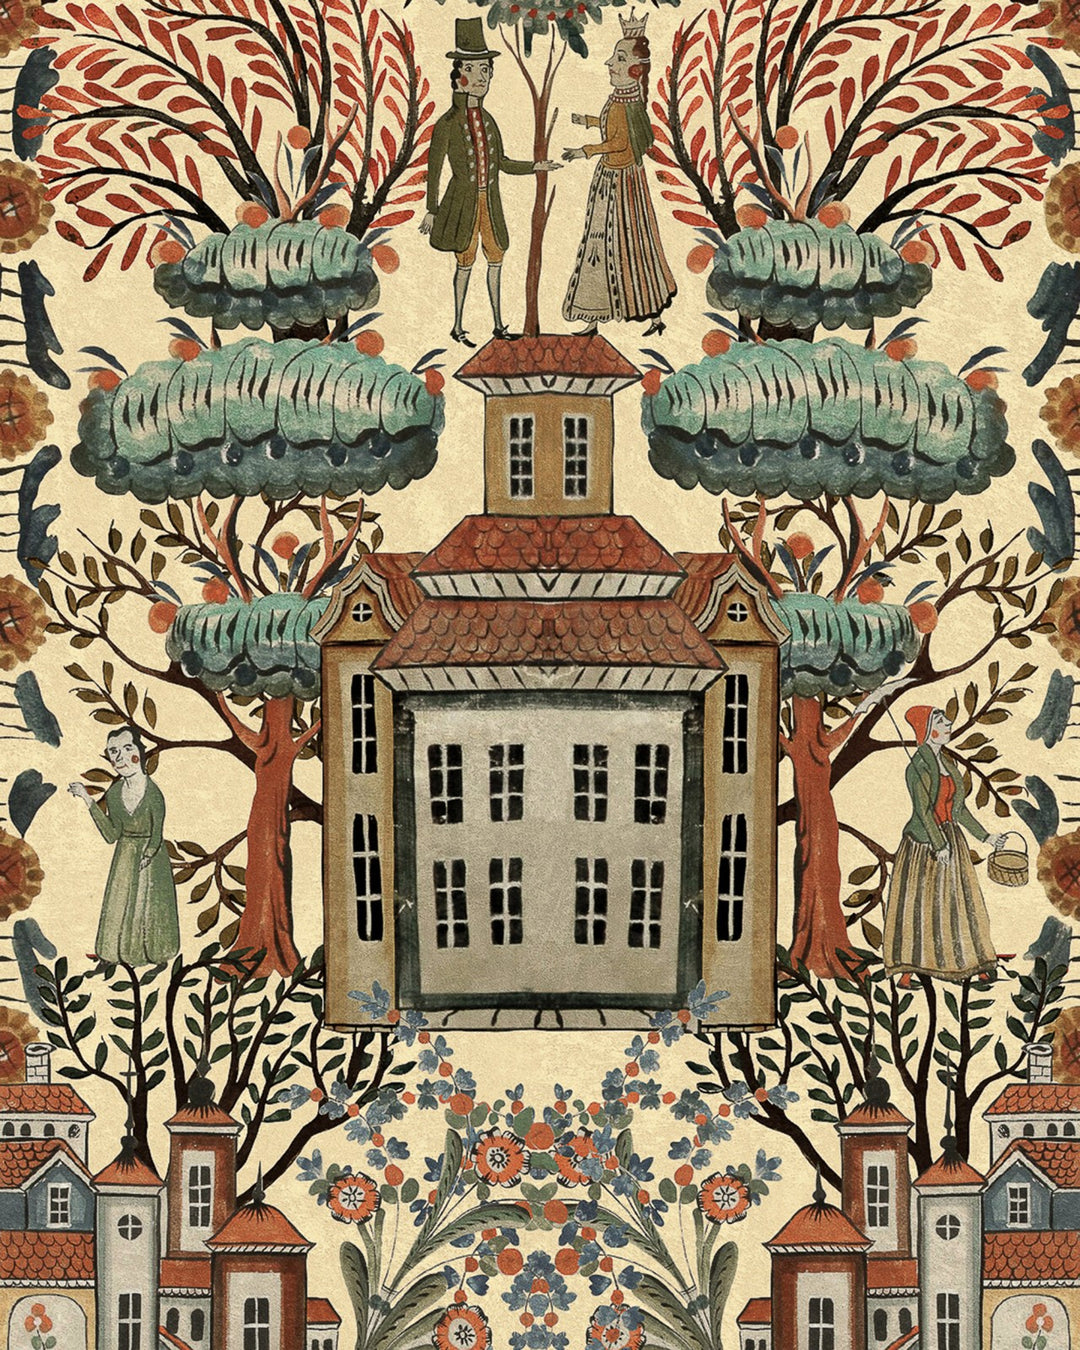 Mind-the-gap-Tyrol-collection-Tales-of-Tyrol-WP20684-cream-village-painting-scene-Nordic-Folklore-architecture-painting-wallpaper-print-Floral-tress-Apres-ski-decr-chalet-cabin-European-folkart- 